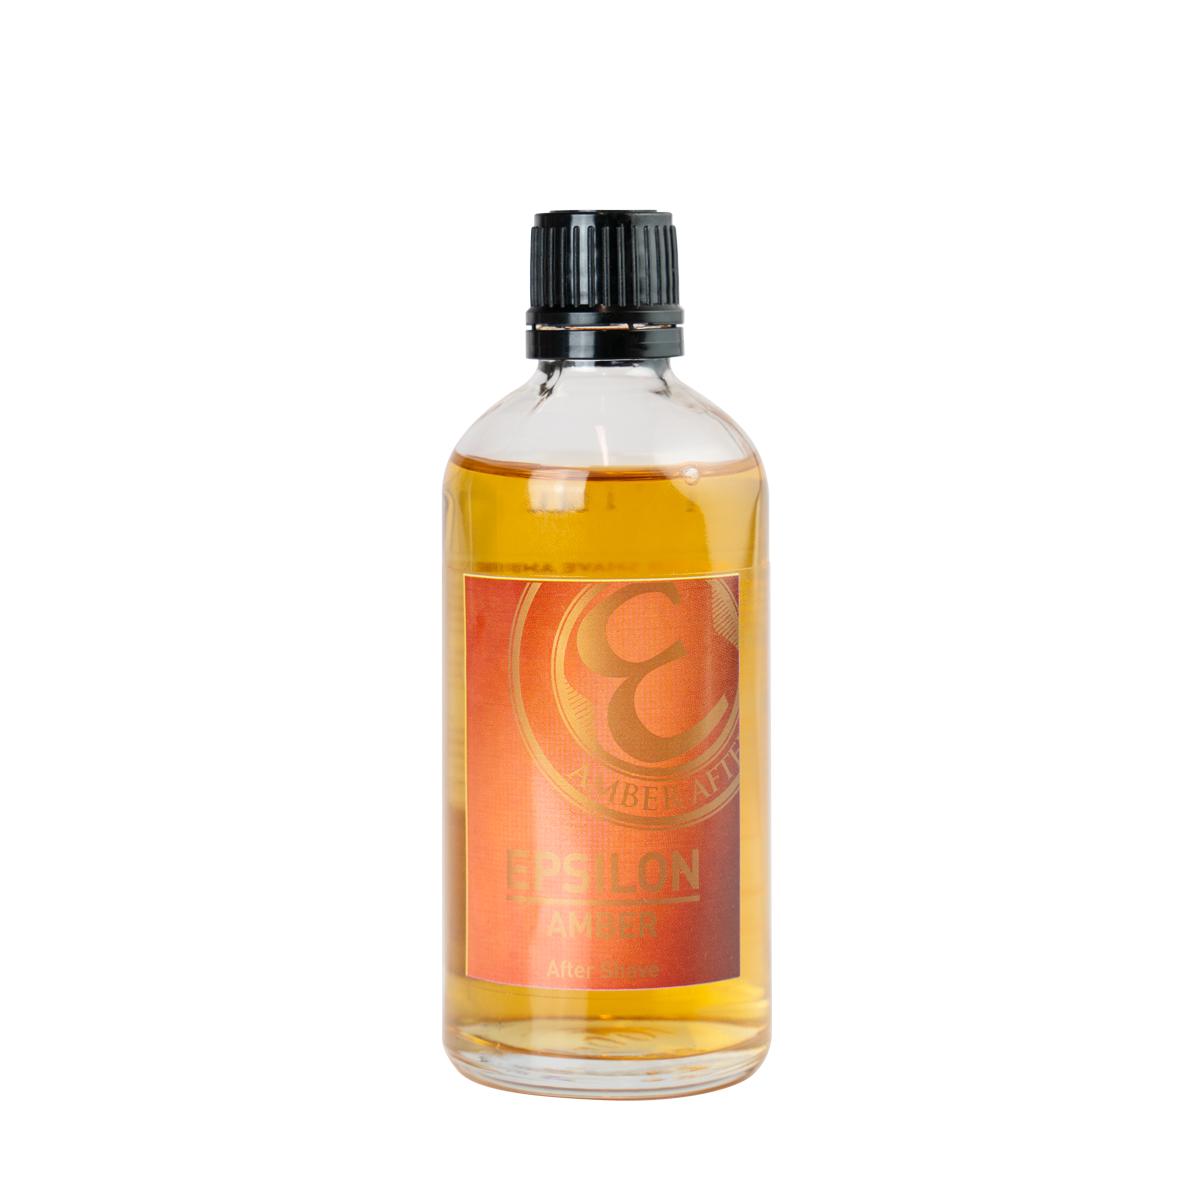 Primary image of Amber Aftershave